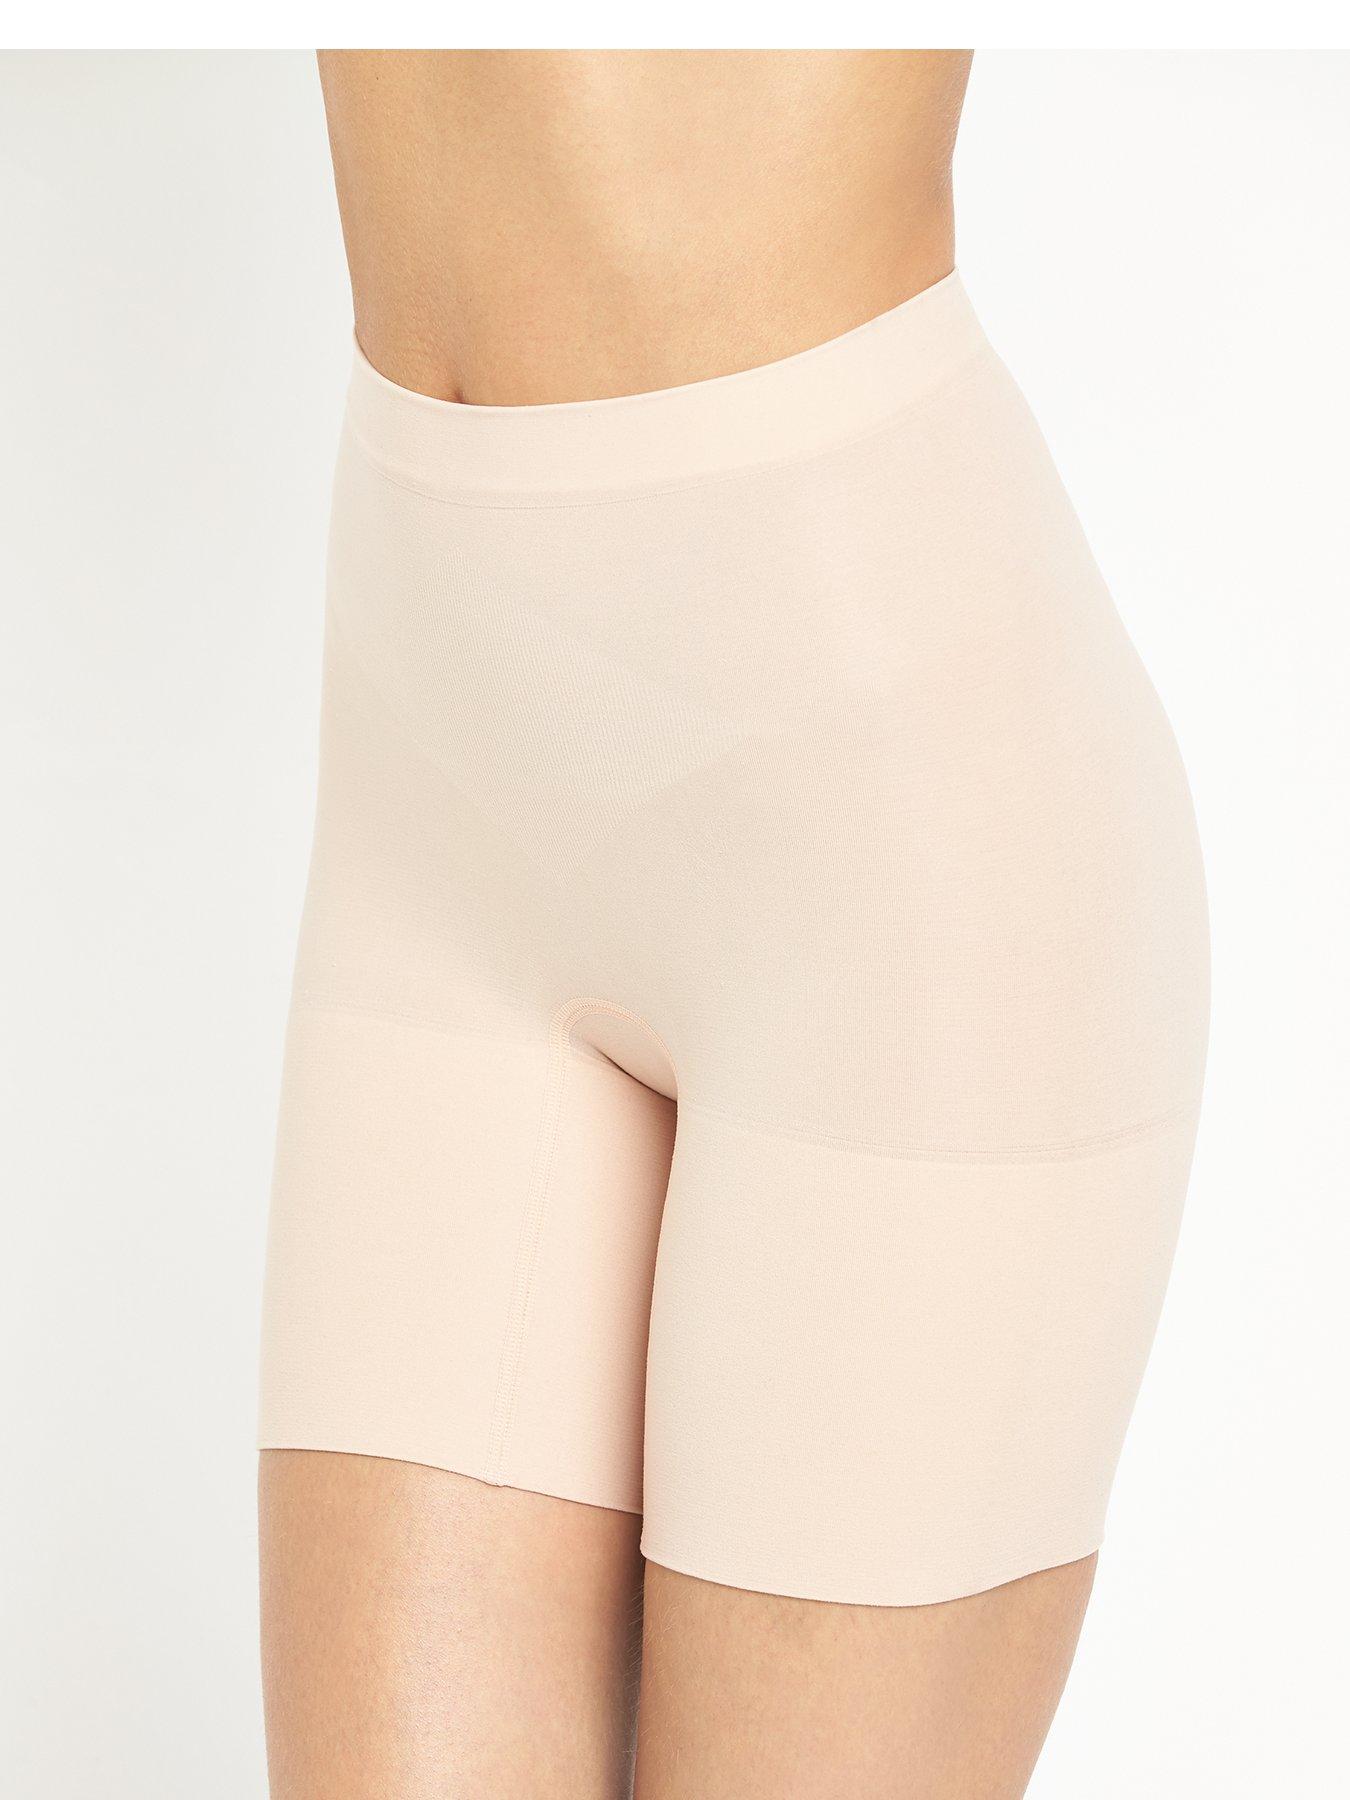 Spanx Firm Control Everyday Seamless Shaping High-Waisted Shorts, £35.00